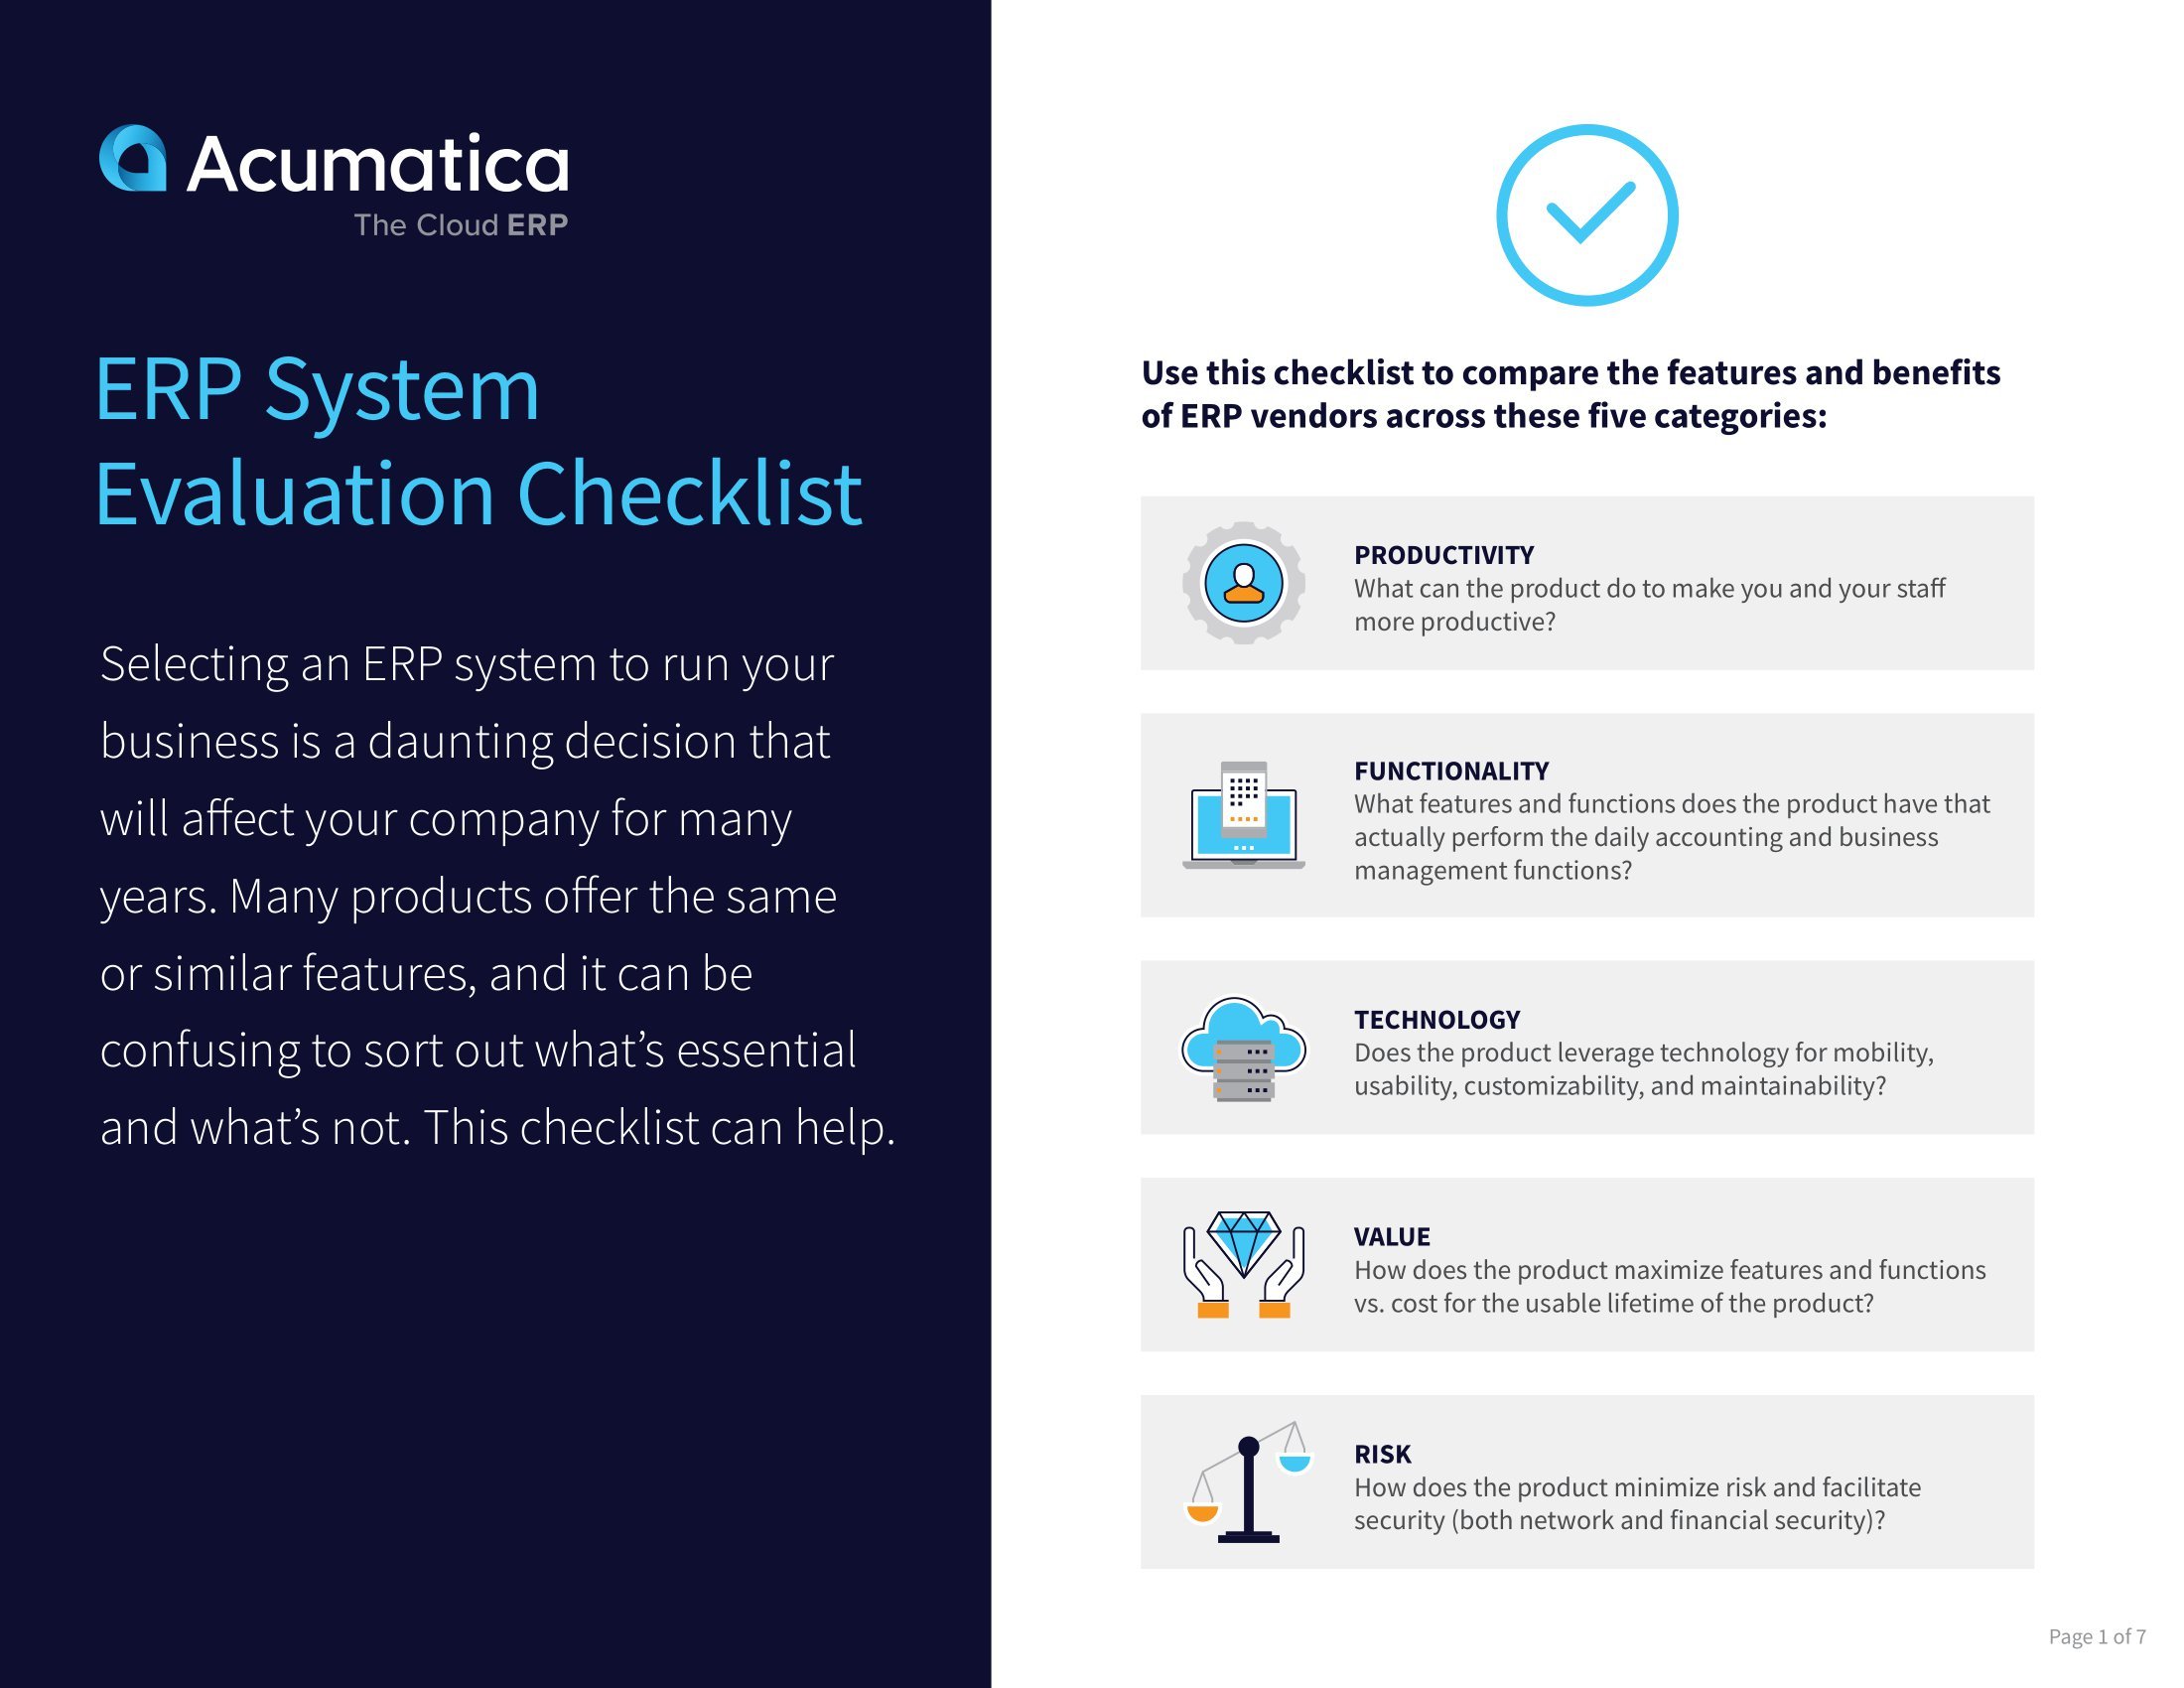 Evaluating ERP systems? This ERP comparison checklist lets you rate solutions across 5 essential categories.